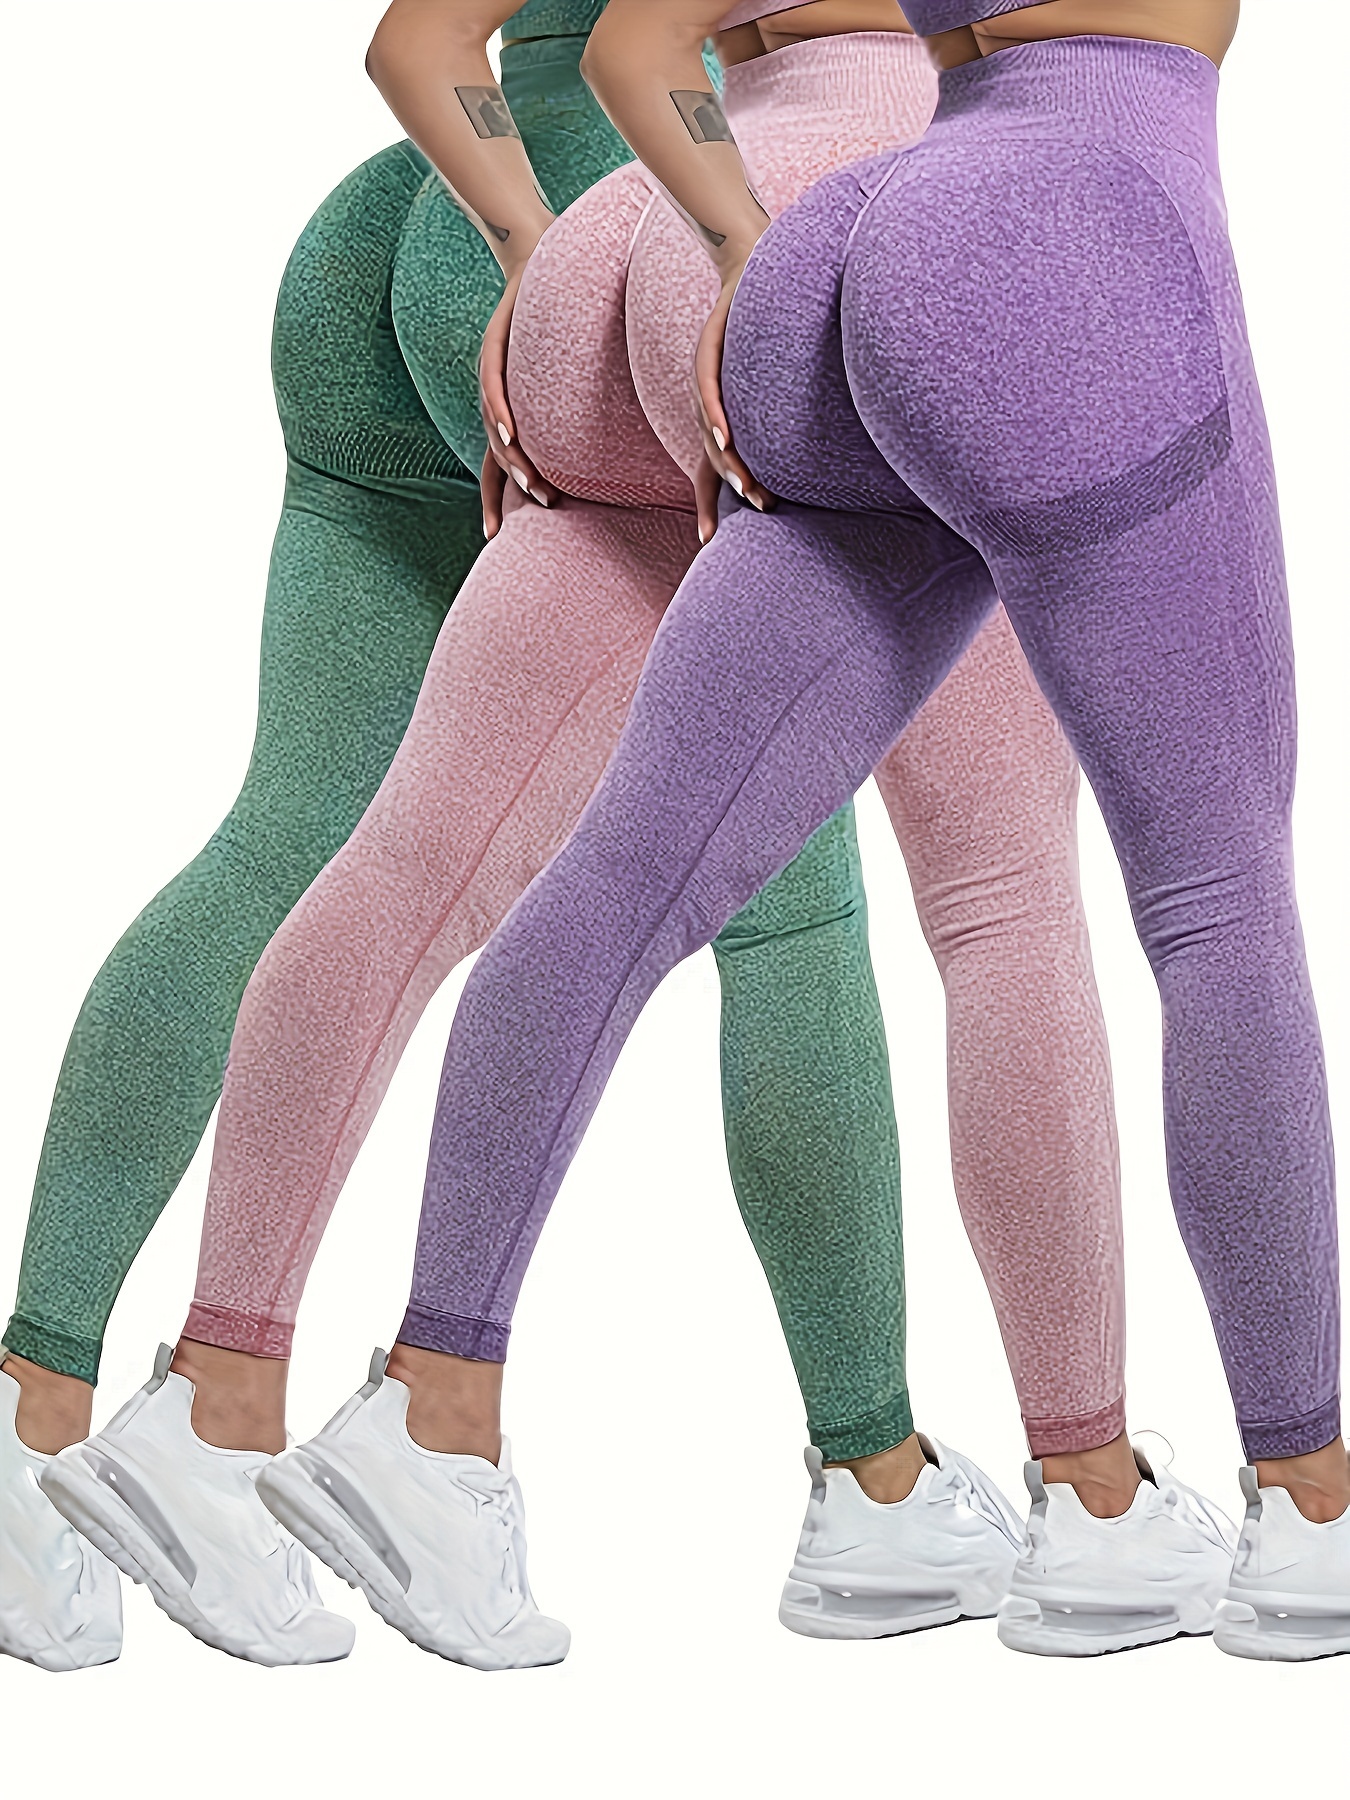 High Waist Candy Color Seamless Yoga Leggings With Pockets With Pockets For  Women Perfect For Fitness, Running, And Sports H1221 From Mengyang10,  $18.94